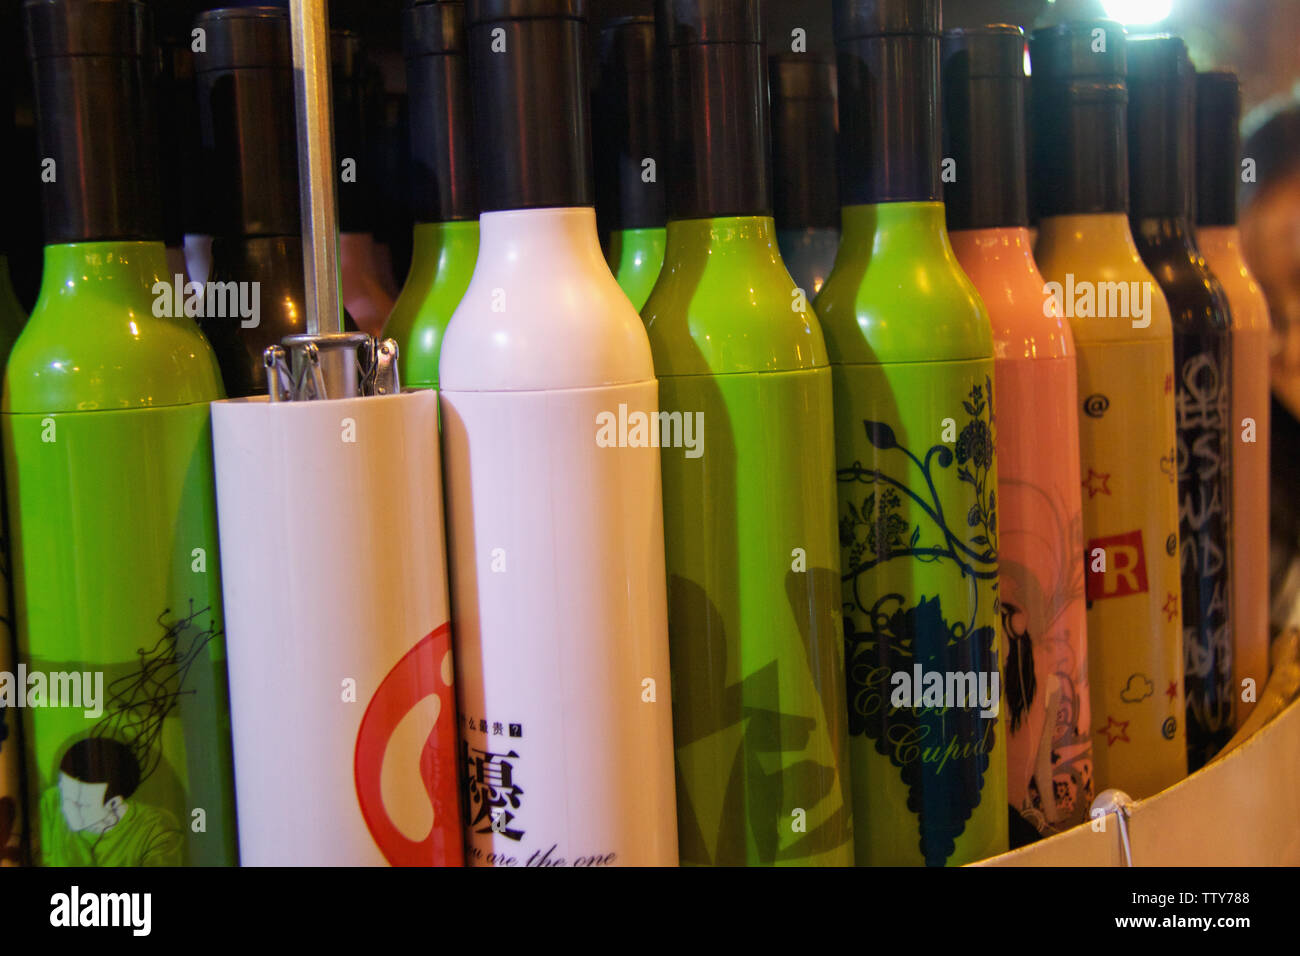 Bottles display at a market stall Stock Photo